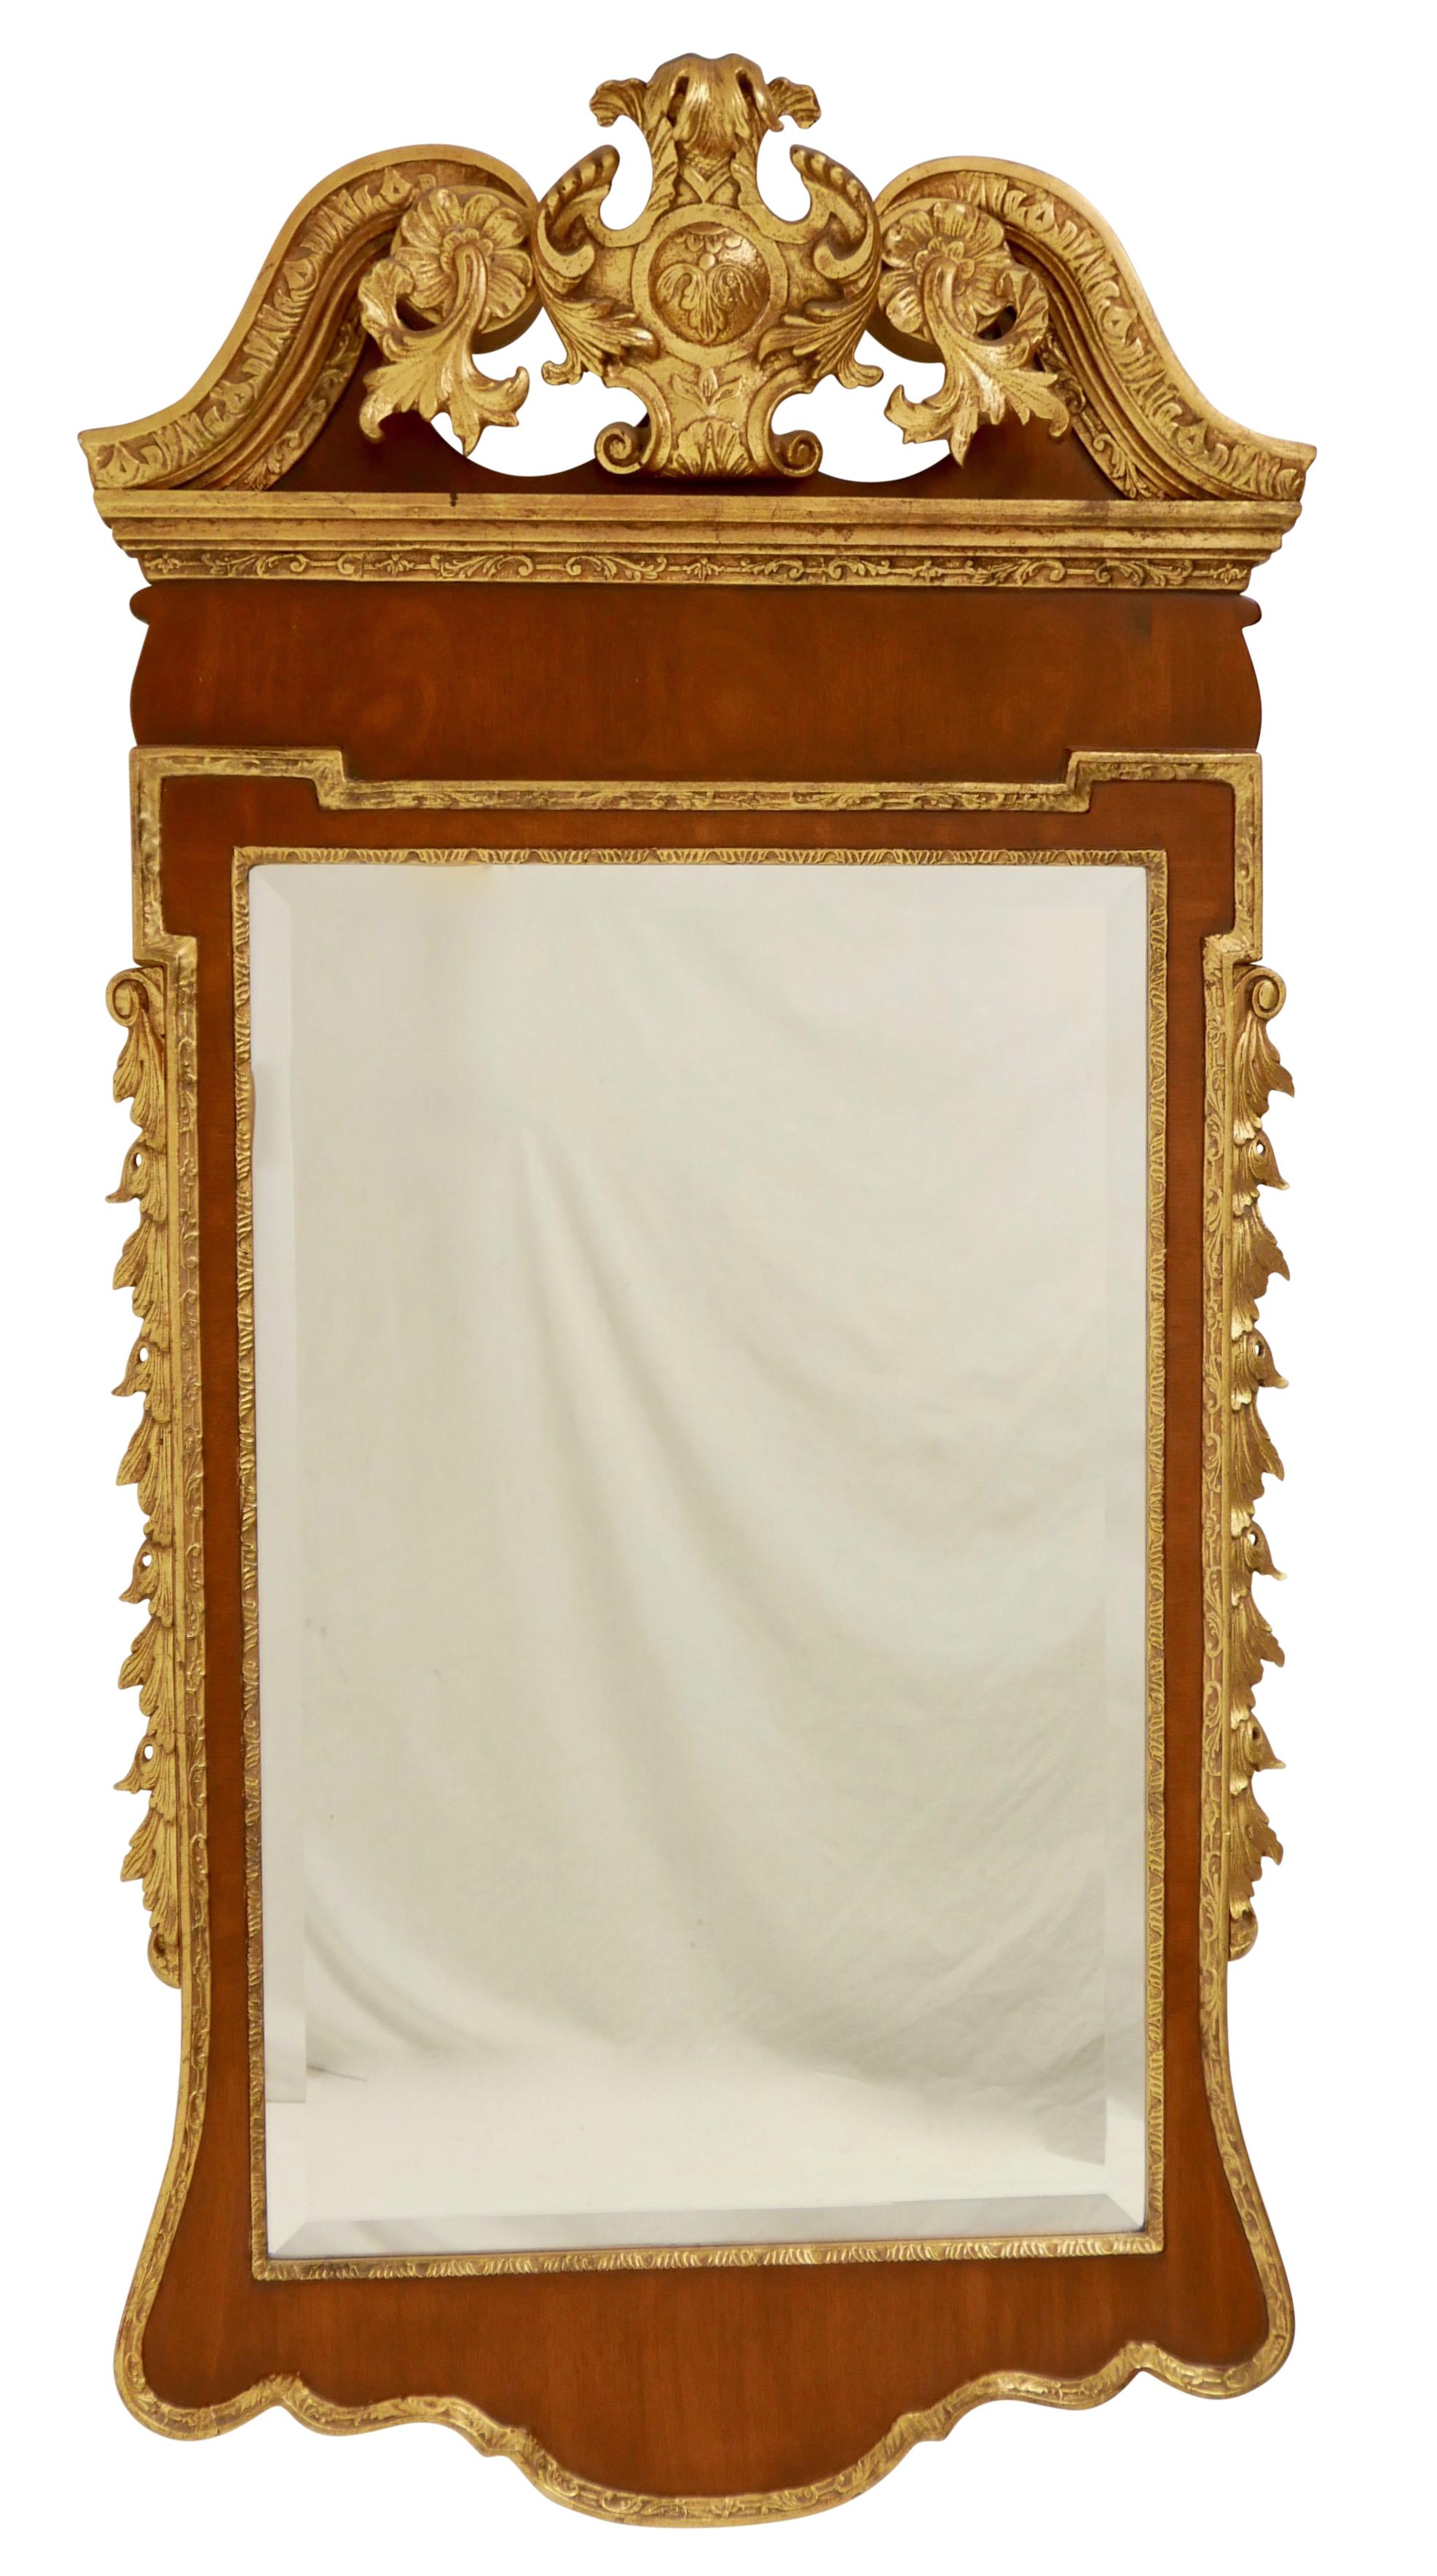 A Georgian style mahogany and giltwood mirror having an elaborately carved center cartouche.
First half of the 20th century.

Measures: 58 tall x 29 wide x 6 deep.